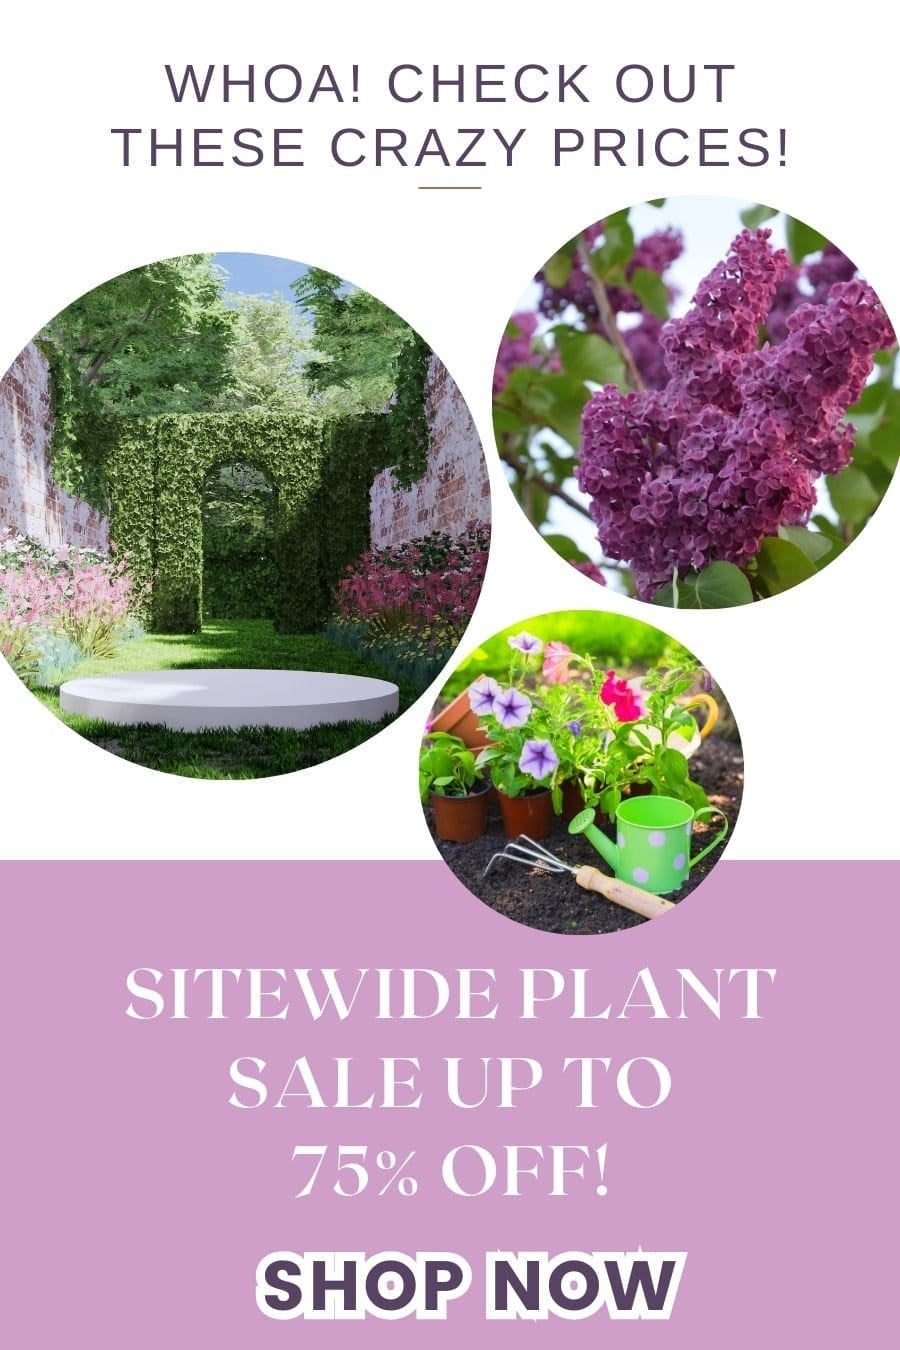 Woah! Check out these crazy prices! Sitewide Plant Sale up to 75% off!